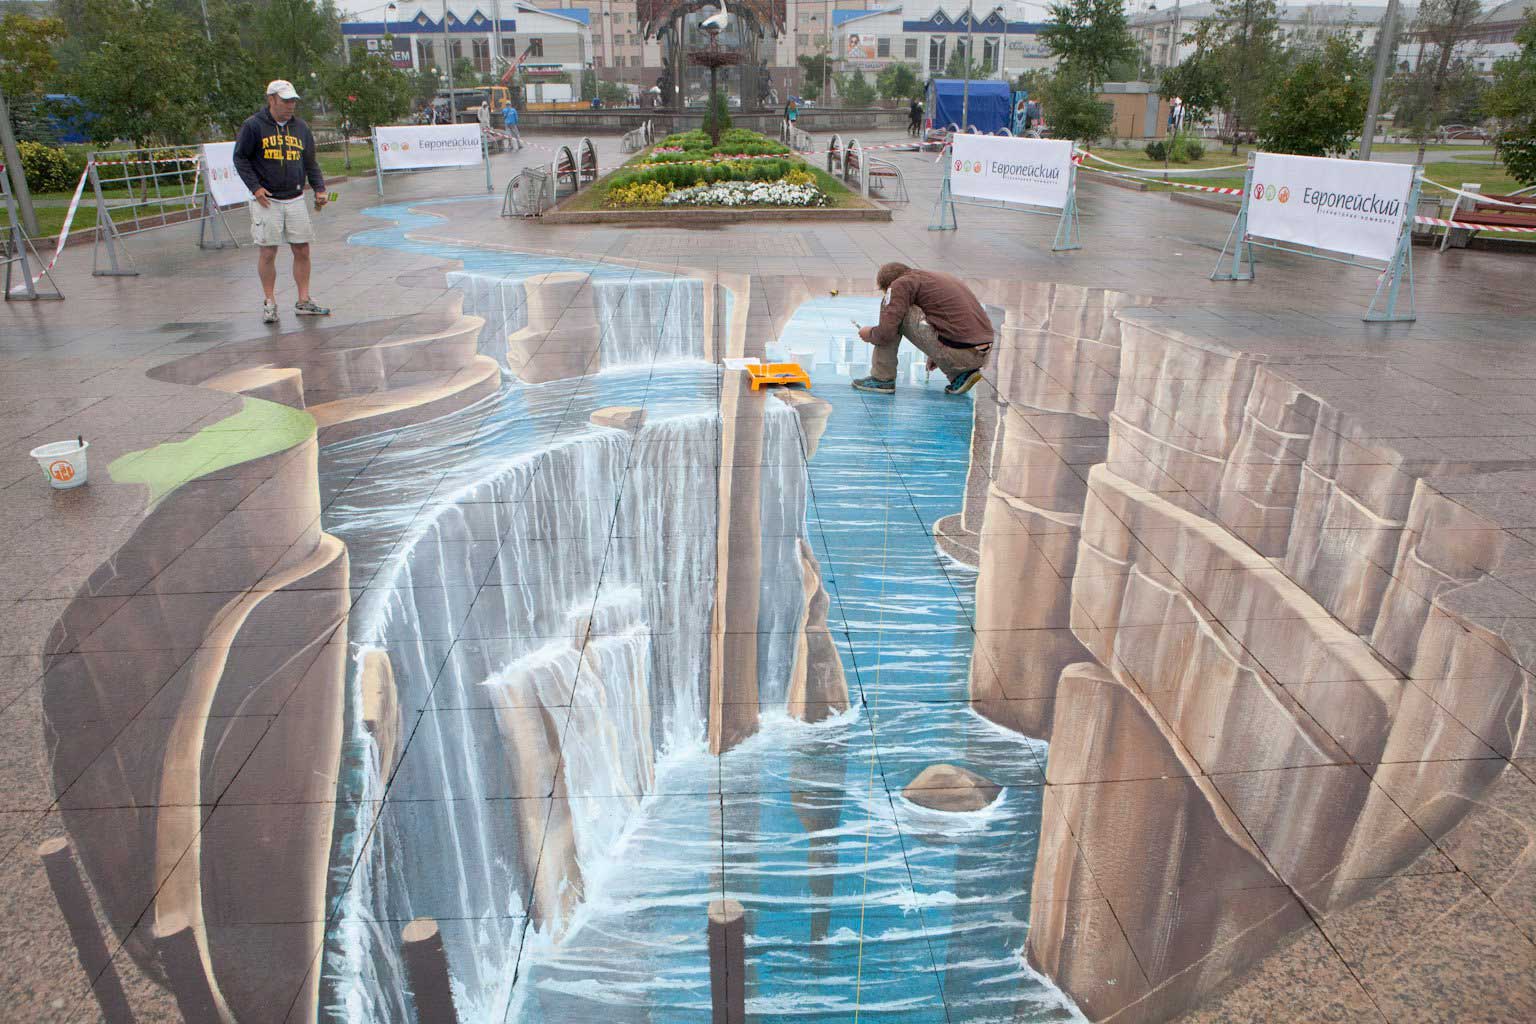 3dstreetpainting-russia